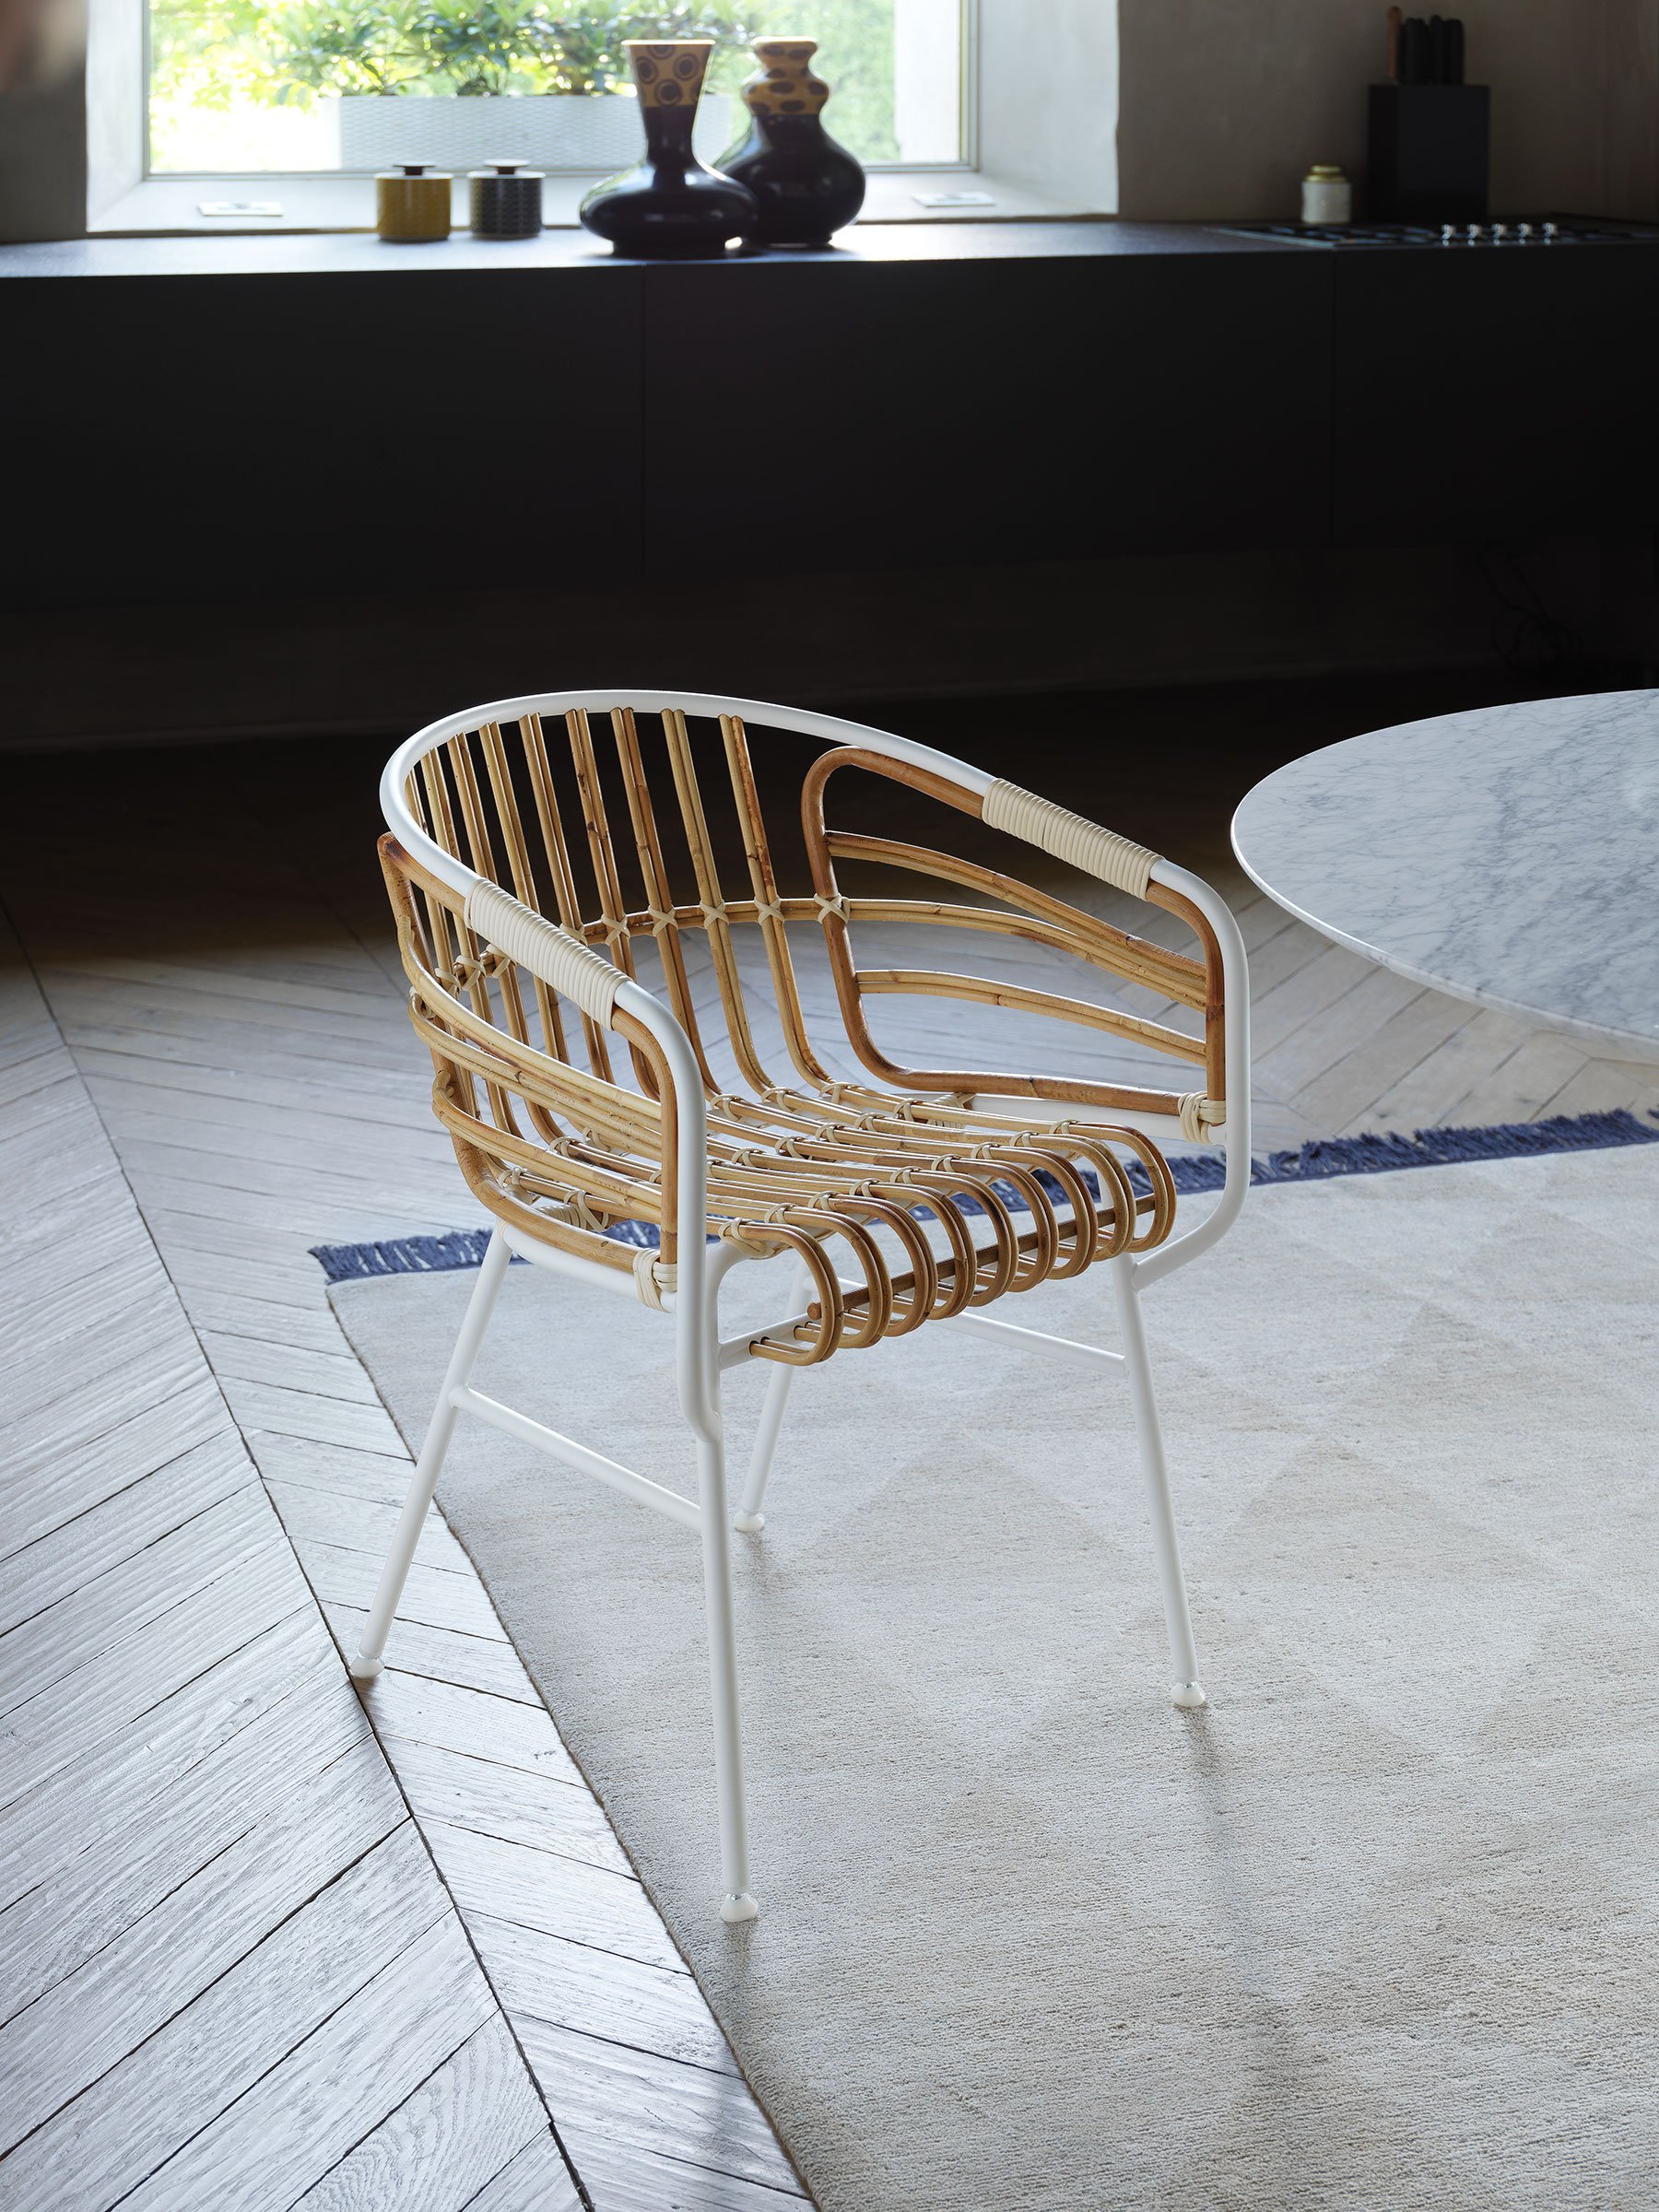 Raphia Rattan Chair from Casamania, designed by Lucidipevere